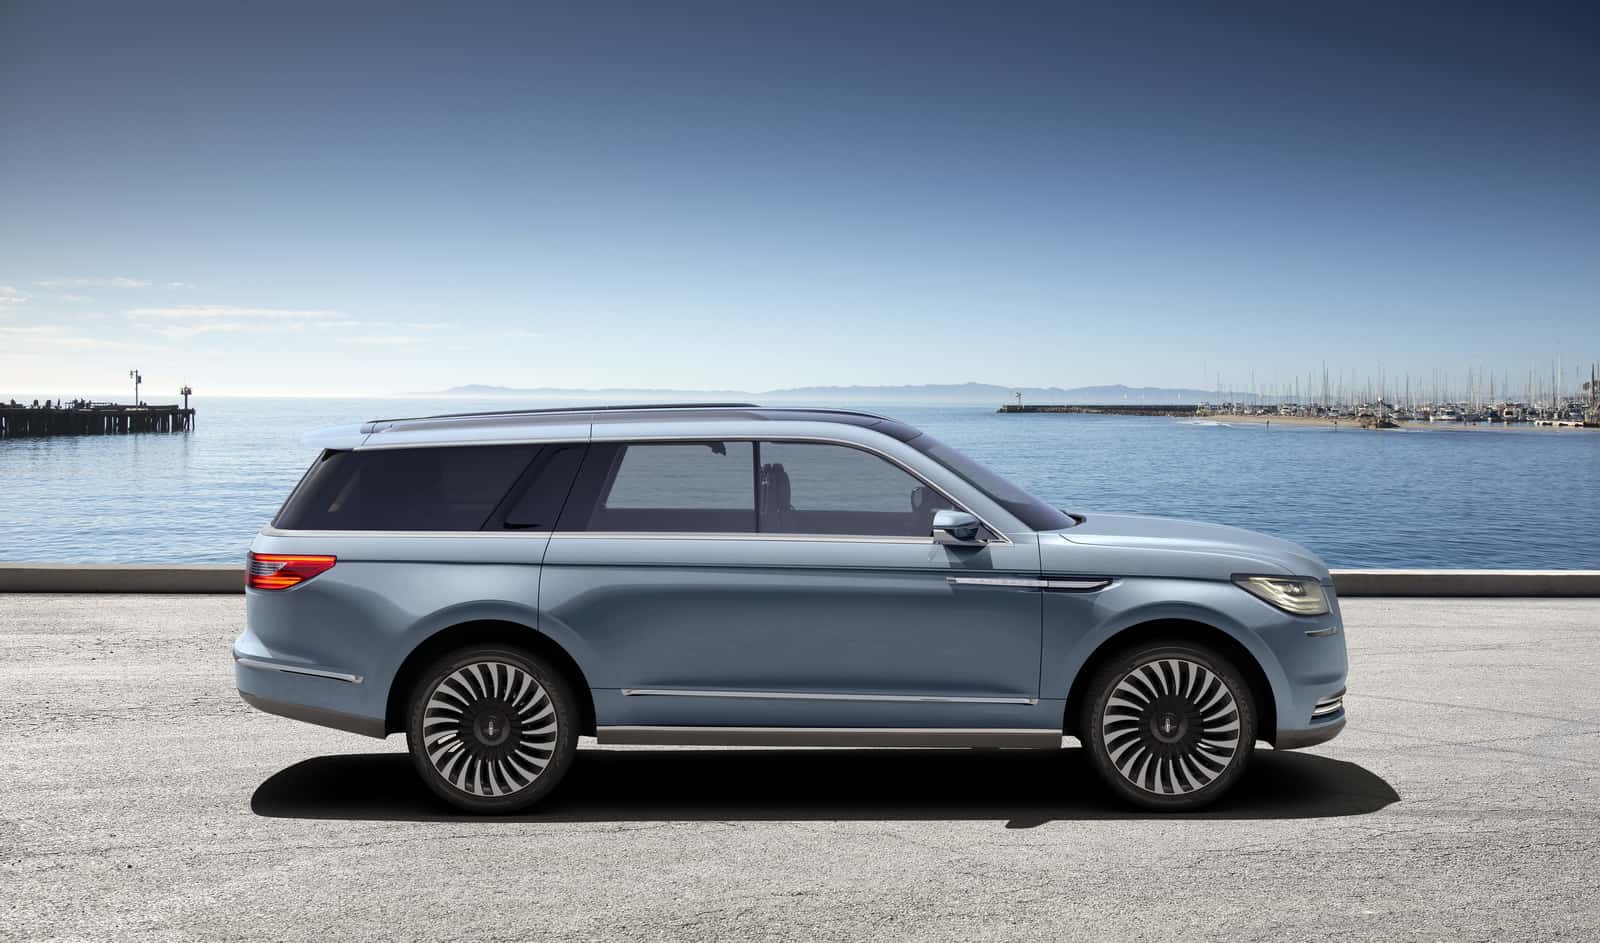 With a sleek silhouette and elegant gullwing doors, the New Navigator Concept brings quiet luxury to full-size SUVs.